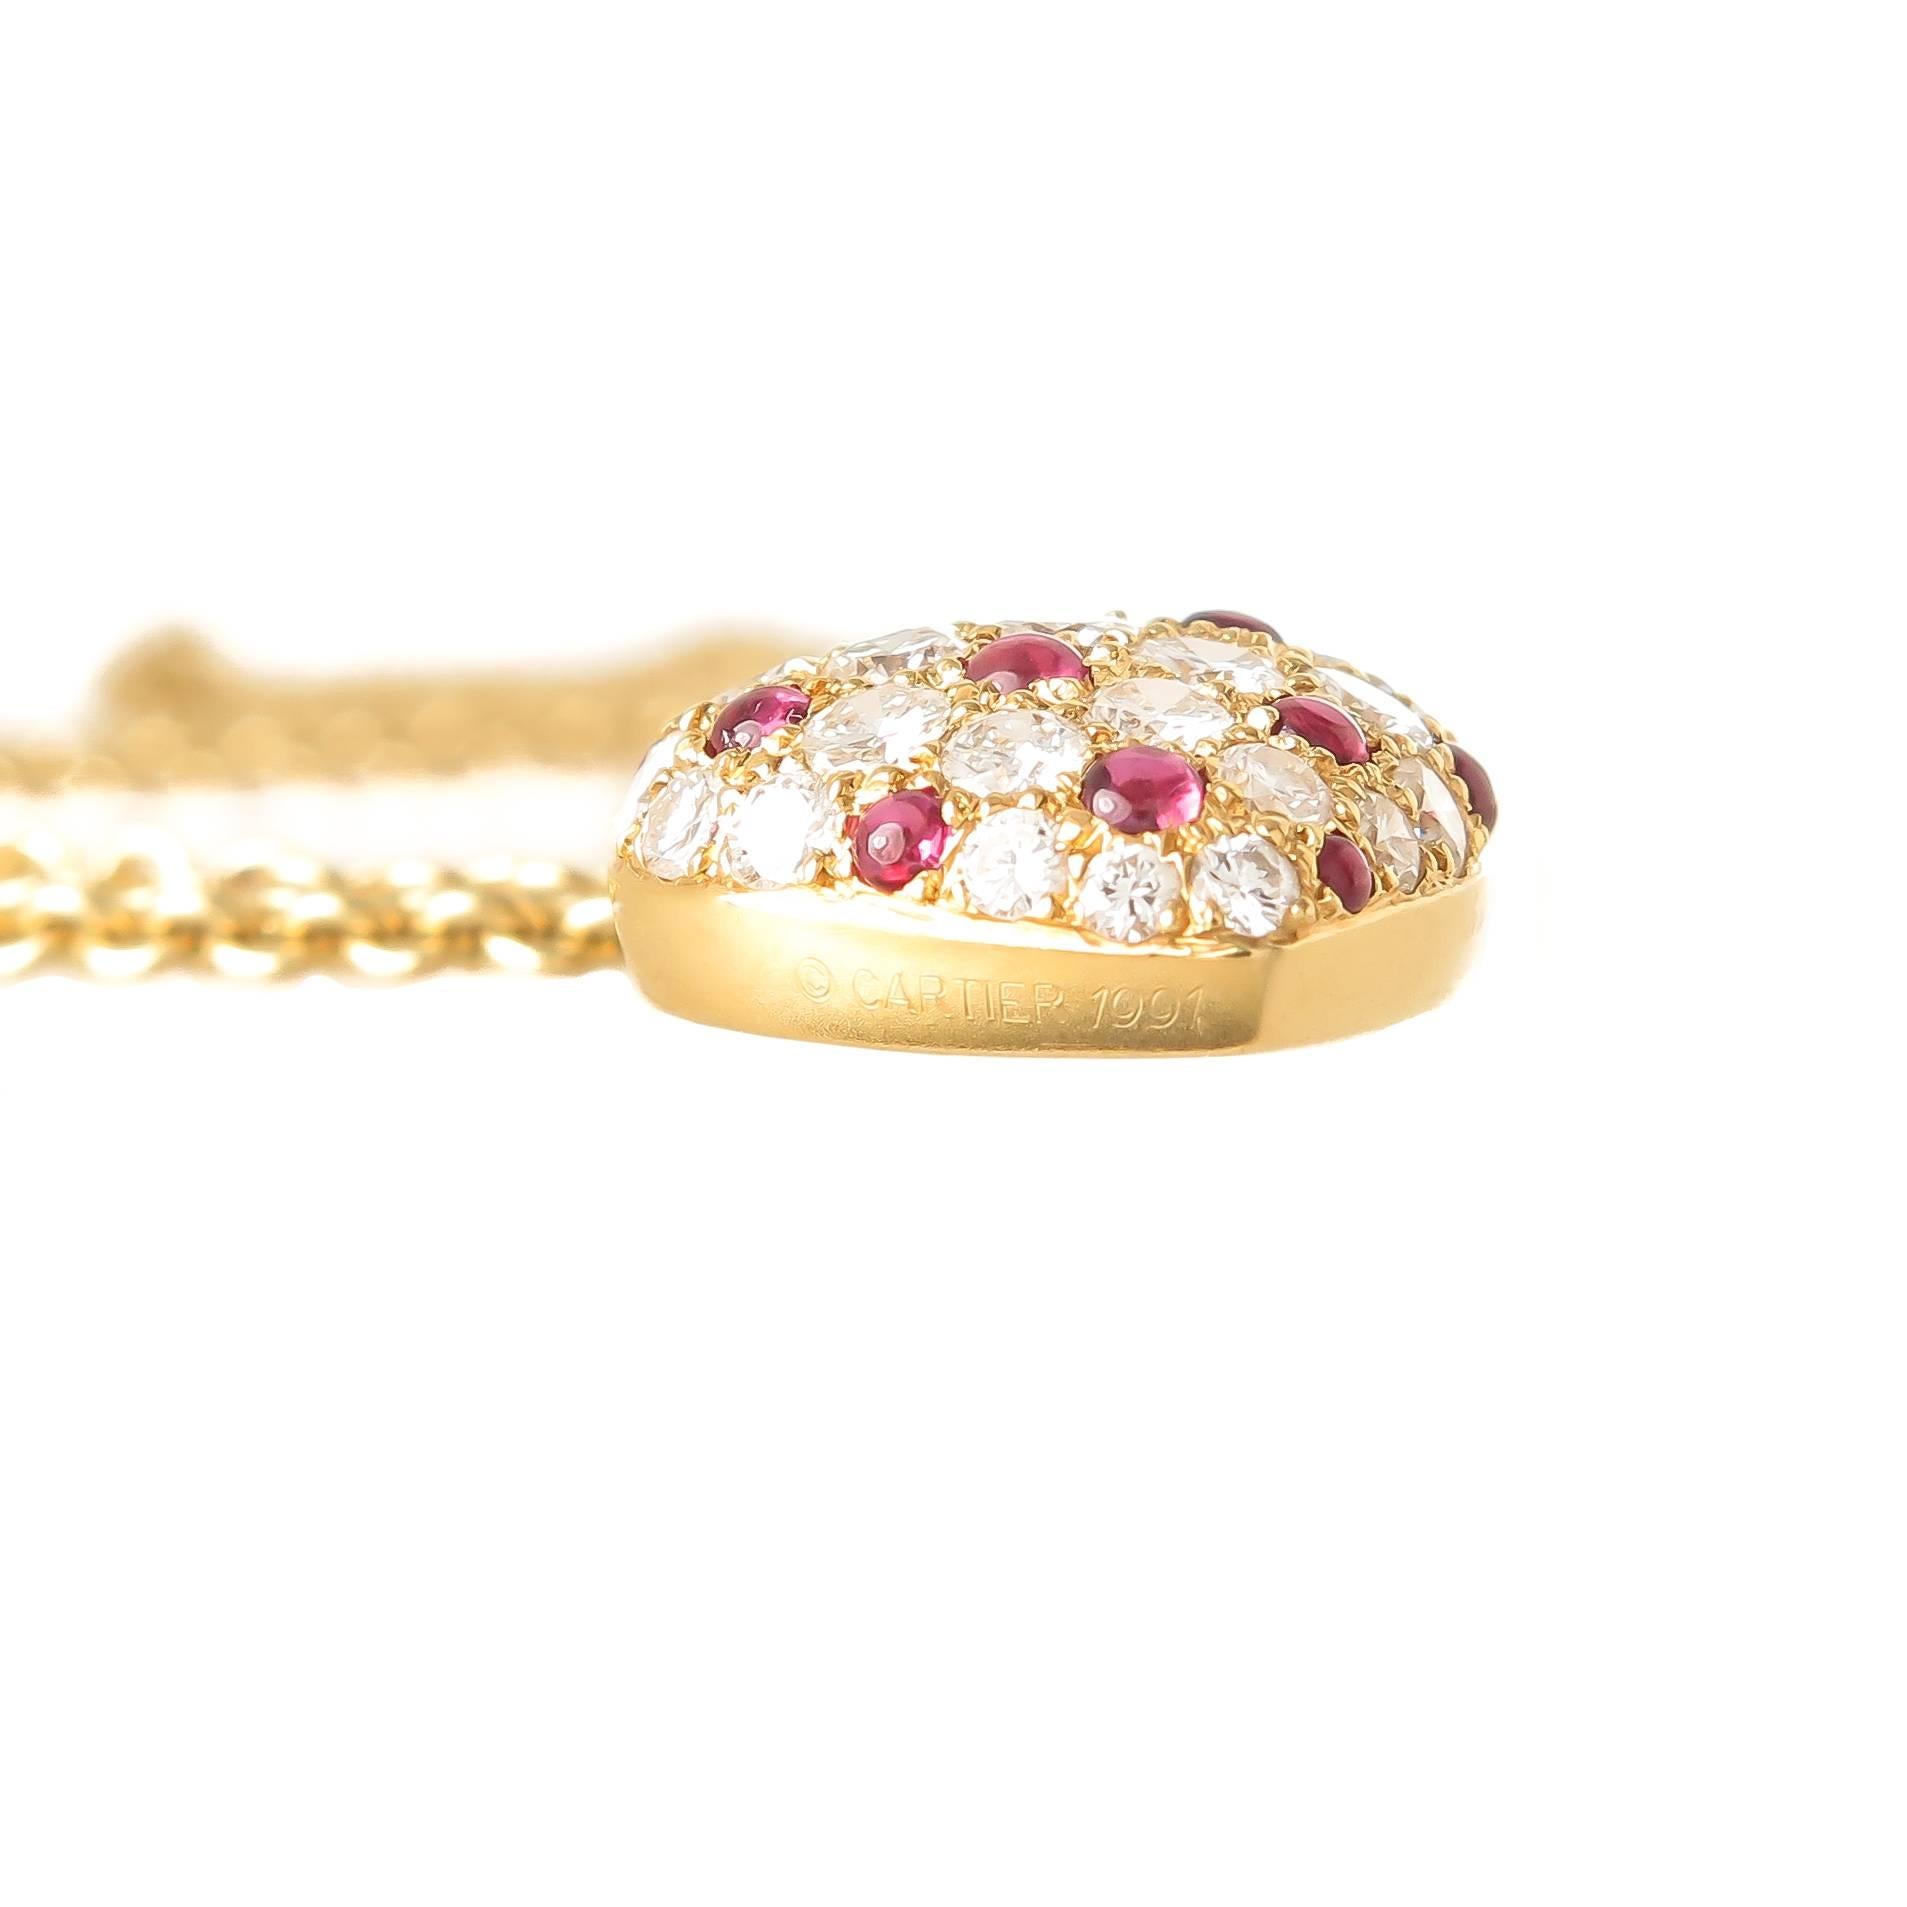 Circa 1990s Cartier 18K yellow Gold Heart Pendant Necklace, measuring 7/8 X 5/8 inch and set with Round Brilliant cut Diamonds totaling 1.50 Carats and Grading as F-G in color and VS in clarity, further set Cabochon Rubies of Very Fine Color and